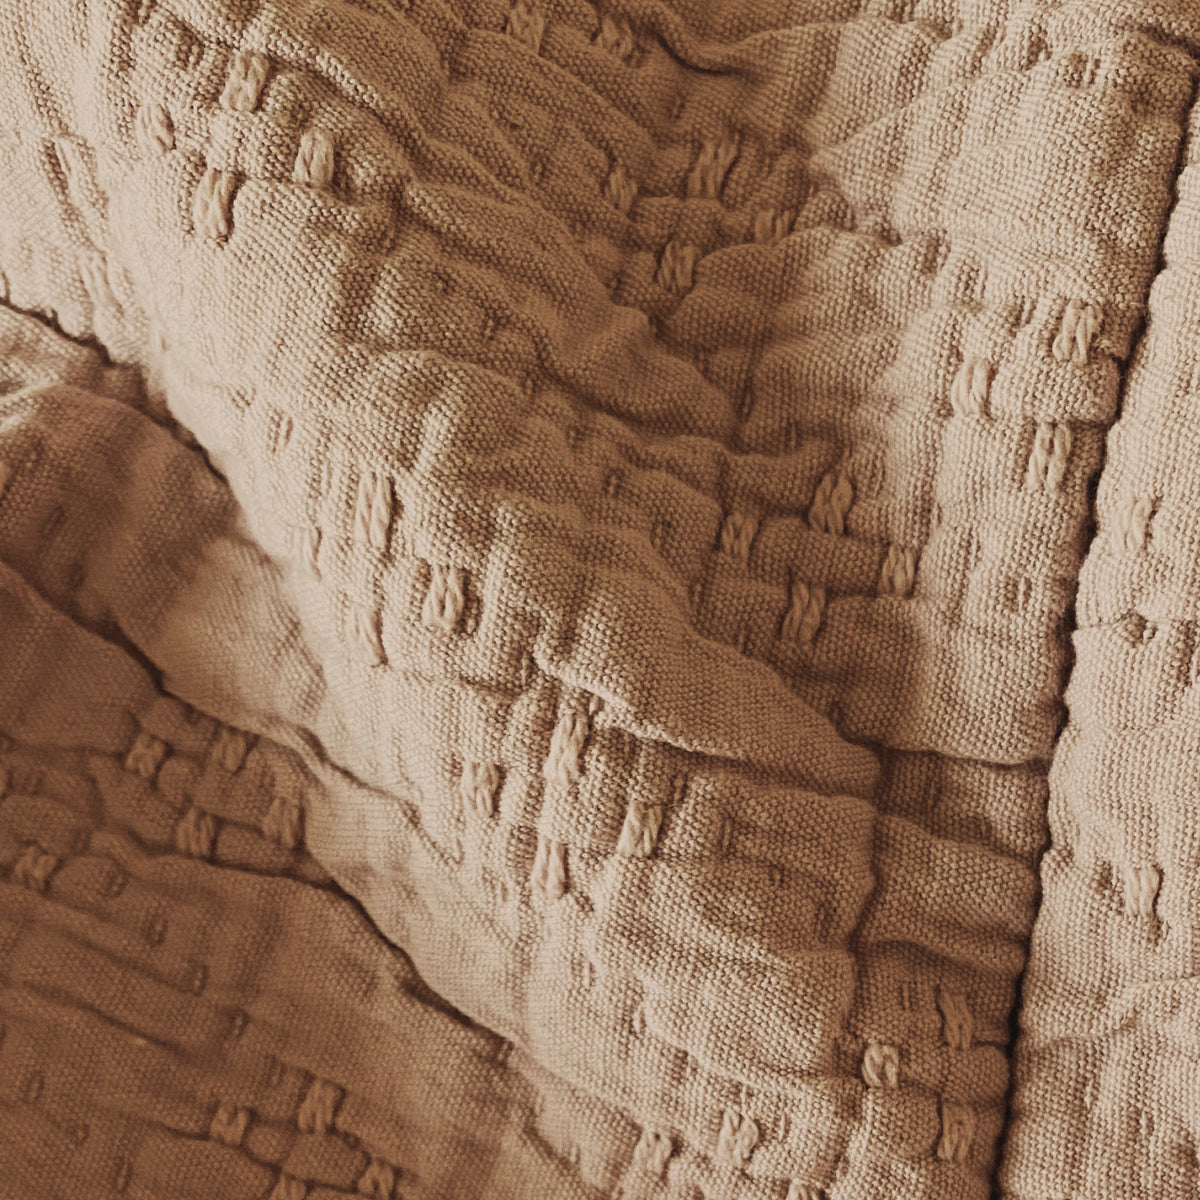 Close-up image of the Ochre Wave fabric